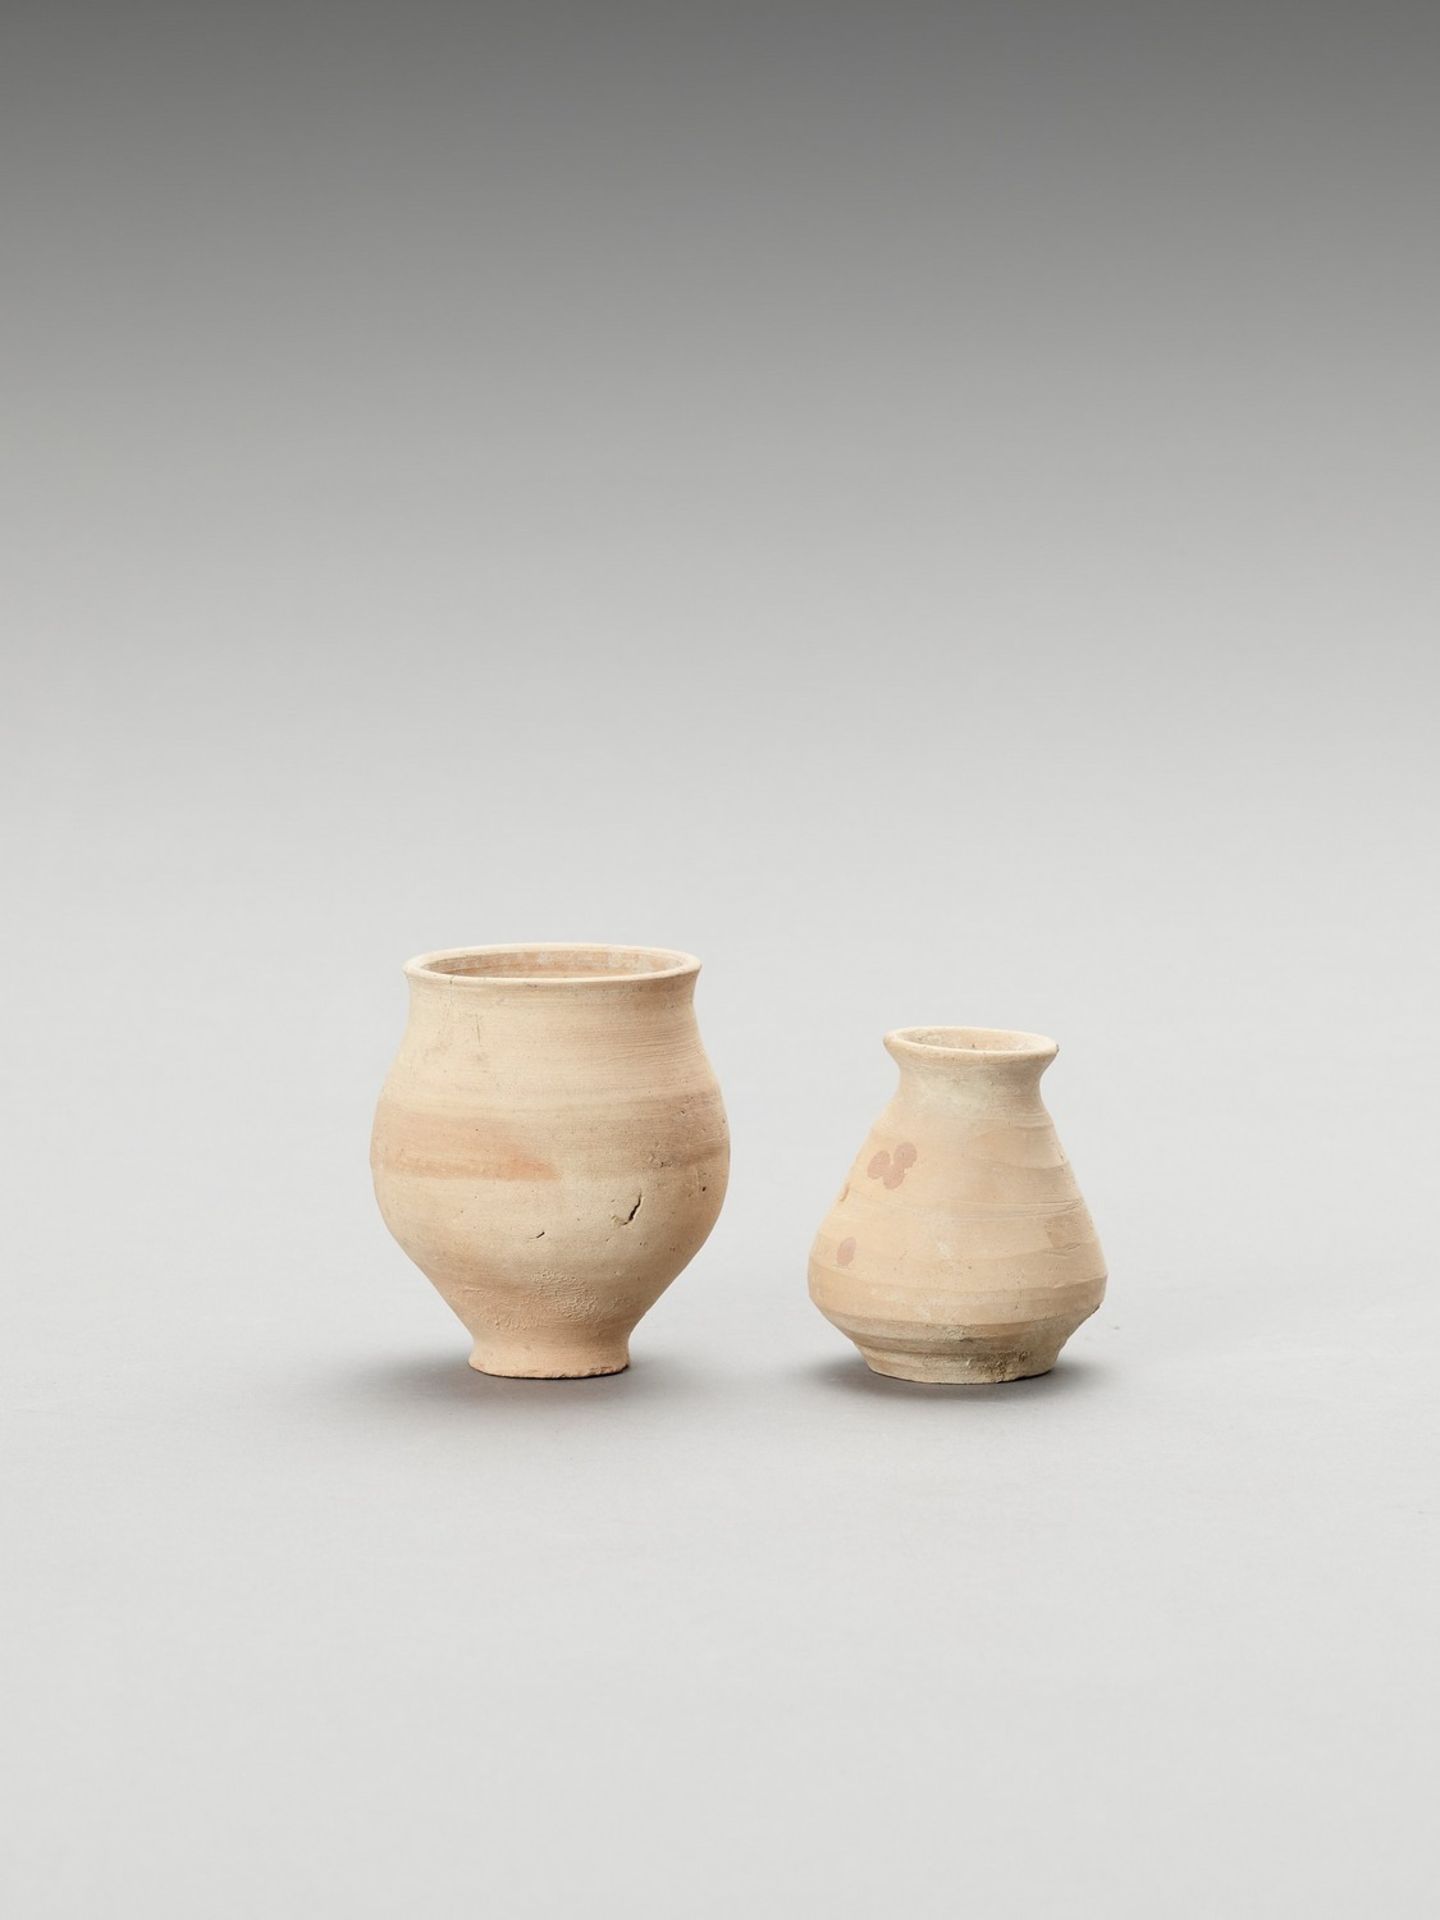 TWO EARLY MEHRGARH SMALL CERAMIC VESSELS